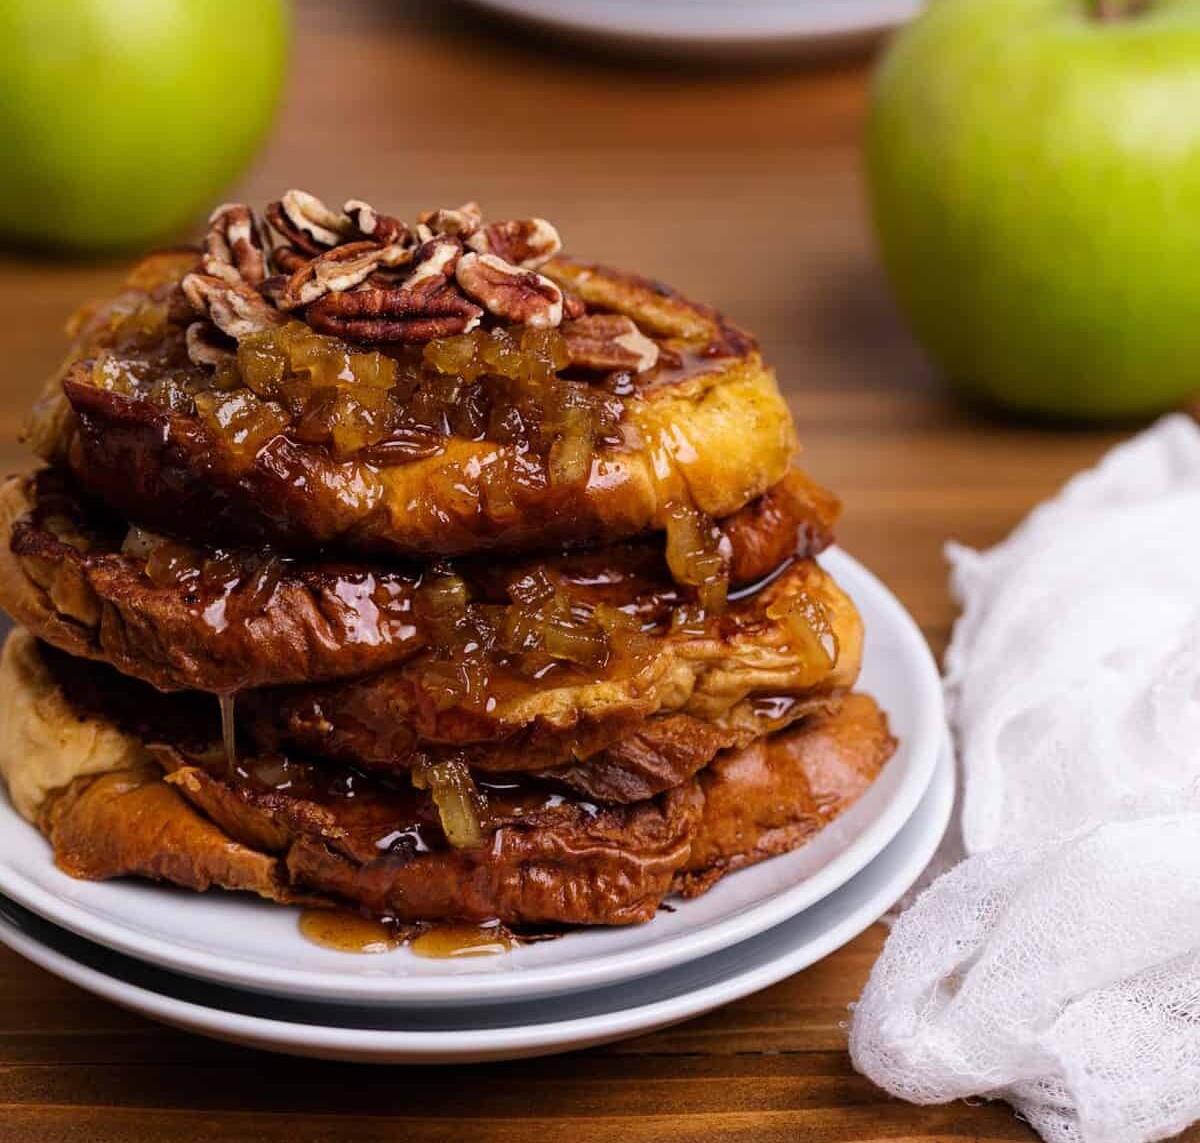 Caramelized Apple French Toast slices on two white plates with a green apple on the side.